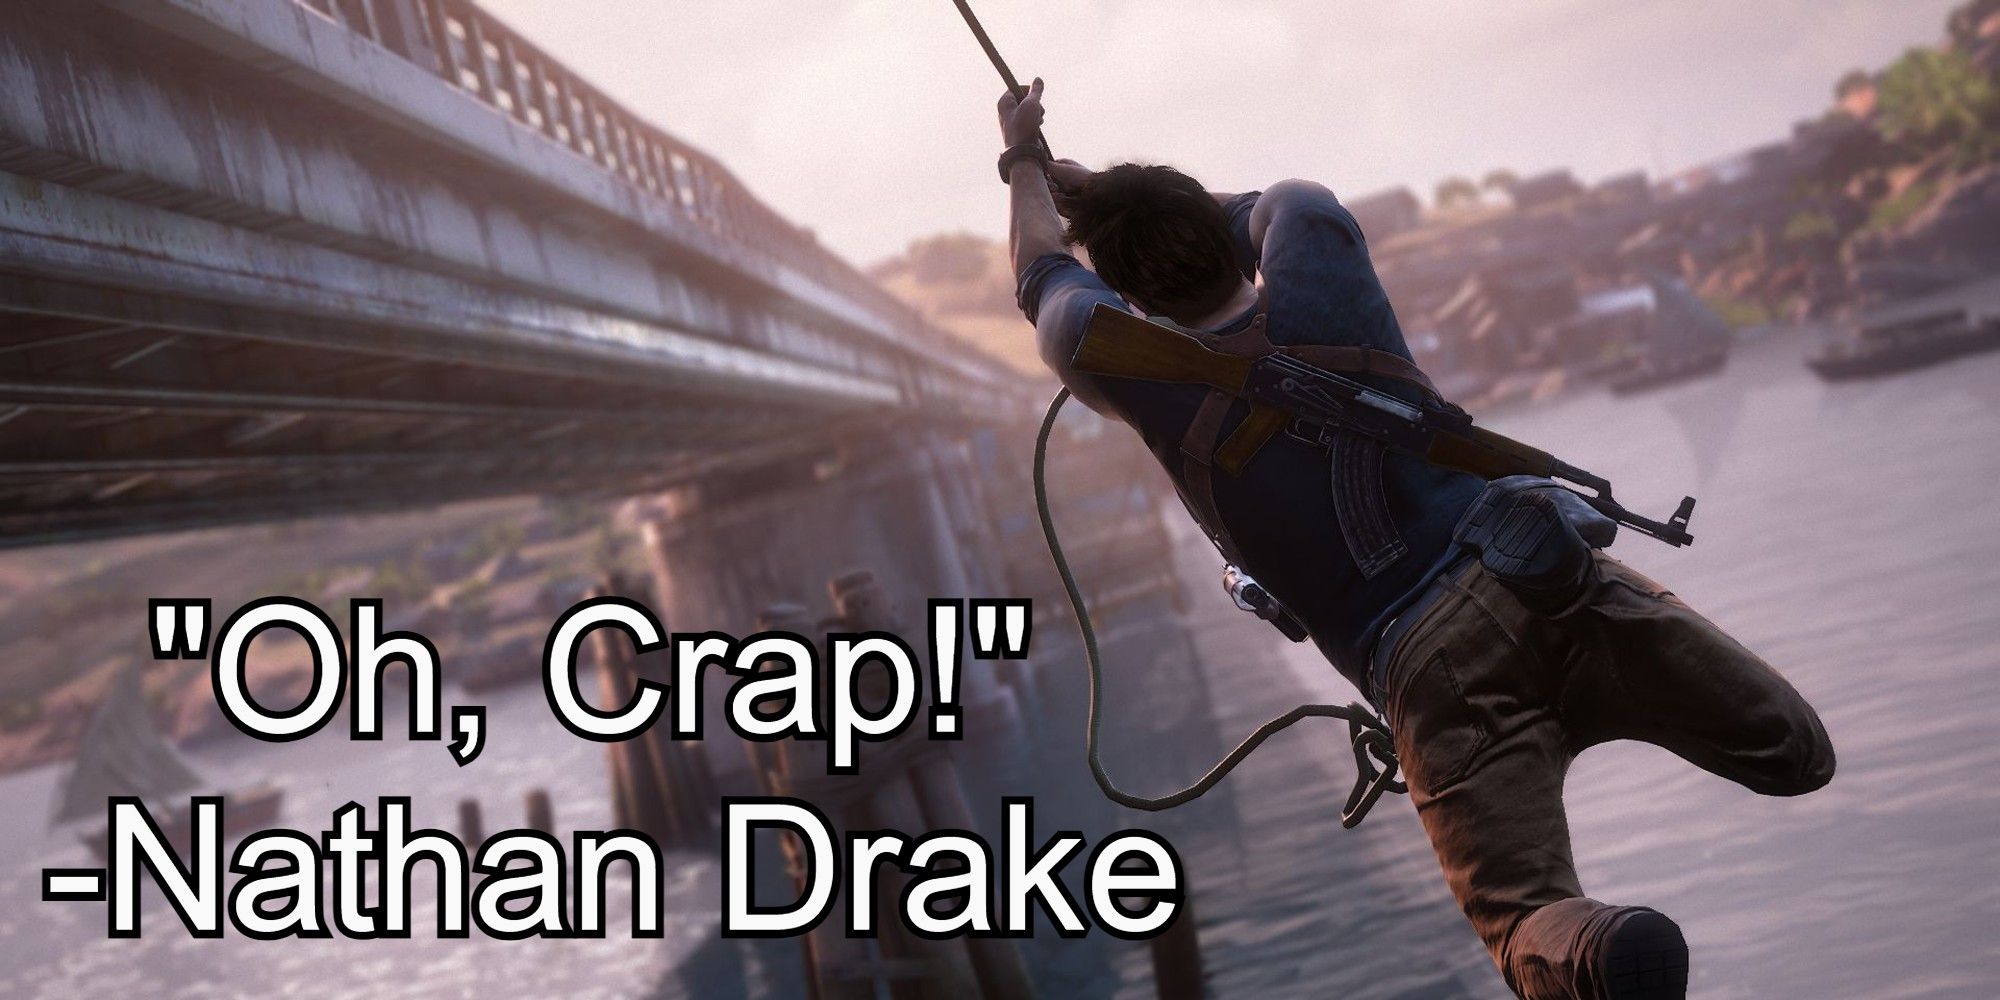 Nathan Drake swinging next to a bridge from Uncharted 4  with "Oh Crap!" caption